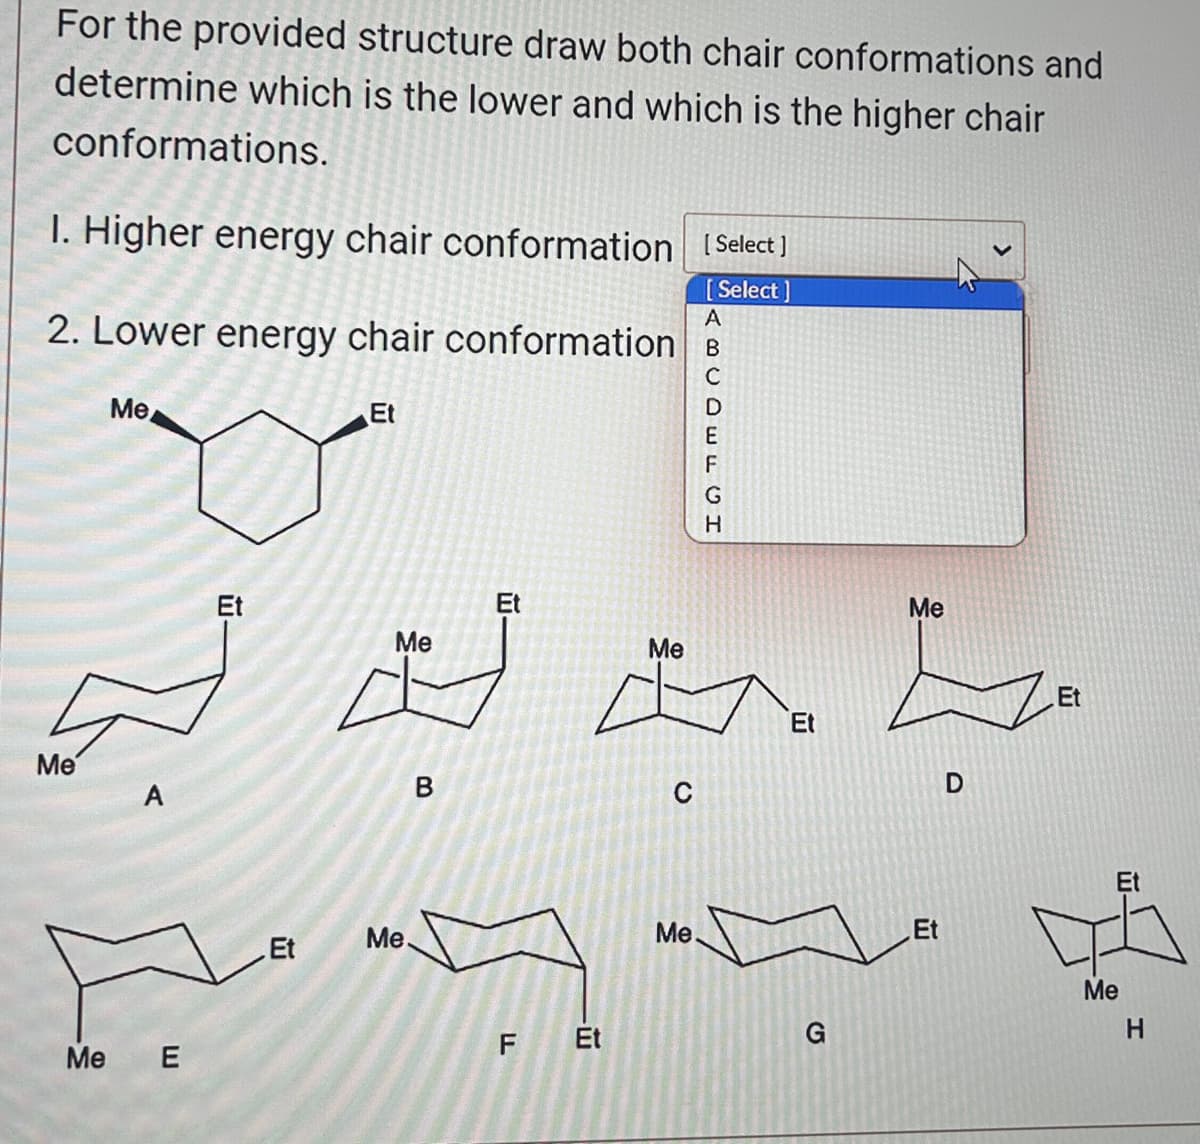 For the provided structure draw both chair conformations and
determine which is the lower and which is the higher chair
conformations.
1. Higher energy chair conformation [Select]
[Select]
2. Lower energy chair conformation B
Me
Me
Me
E
Et
Et
Et
Me
Me
B
Et
F
Et
Me
C
ABCDEFGH
Me.
Et
G
Me
Et
D
Et
Et
Me
H